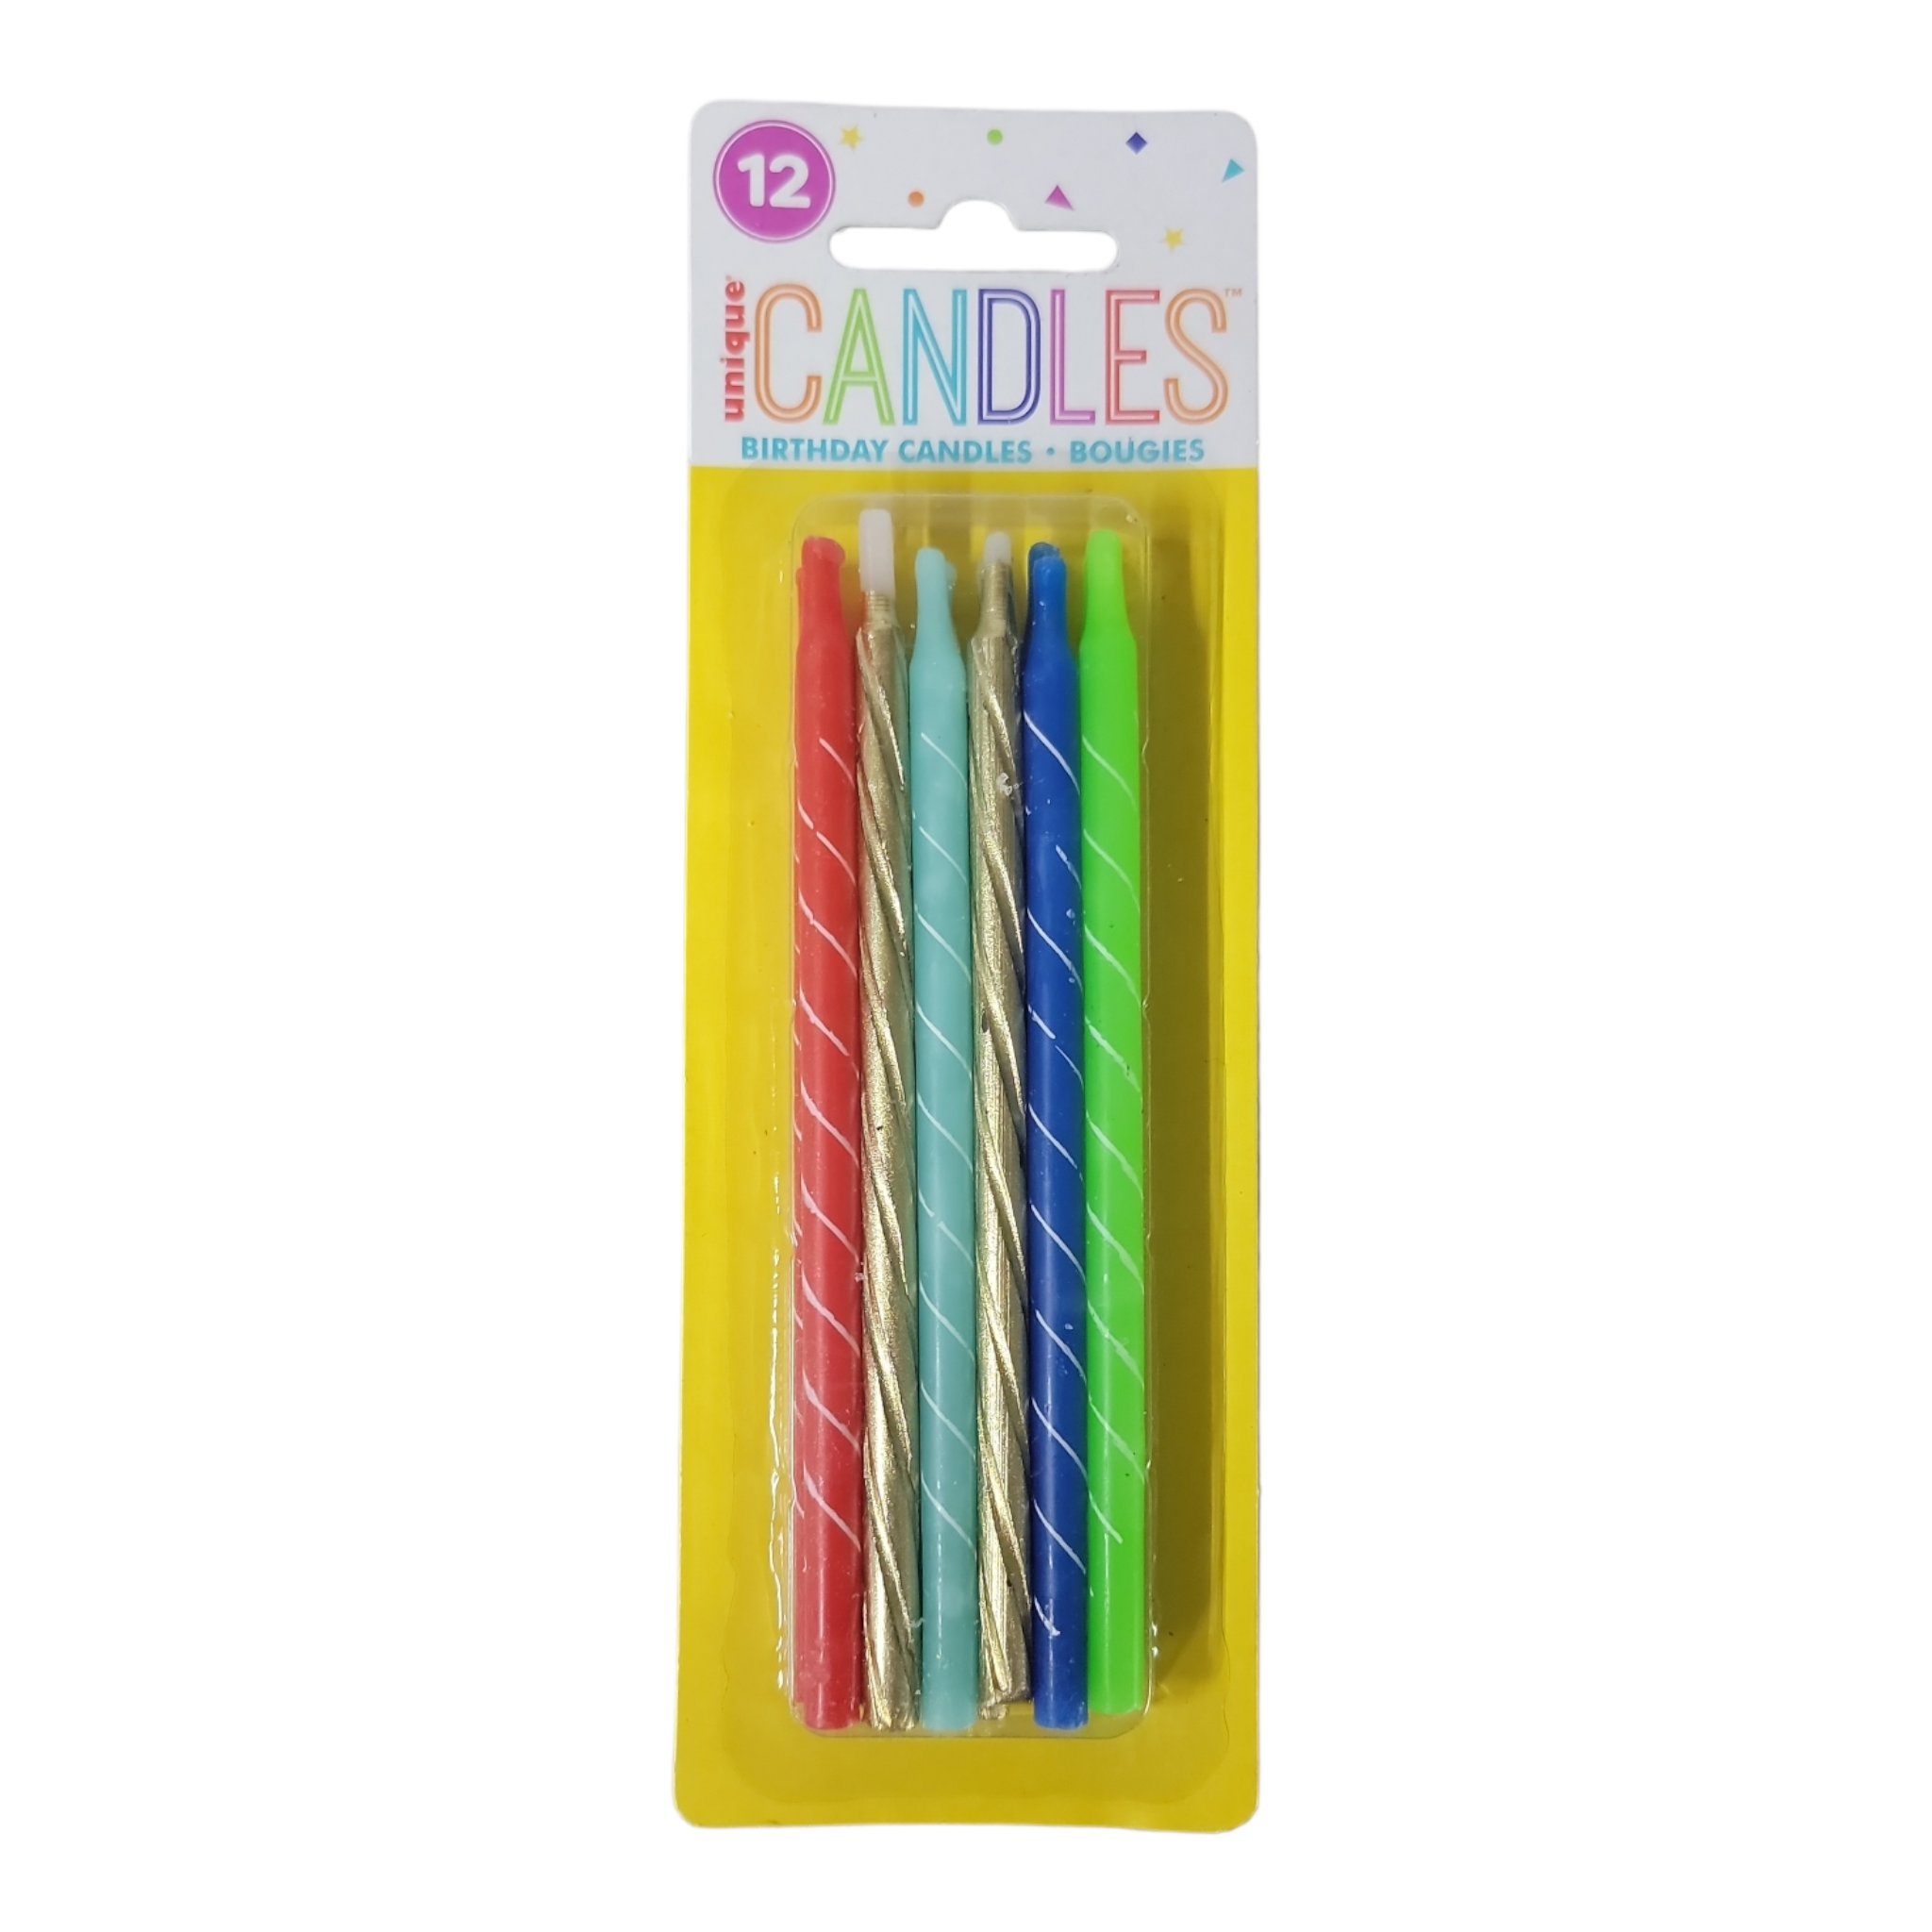 Kit bougies d'anniversaire png - Birthday candles